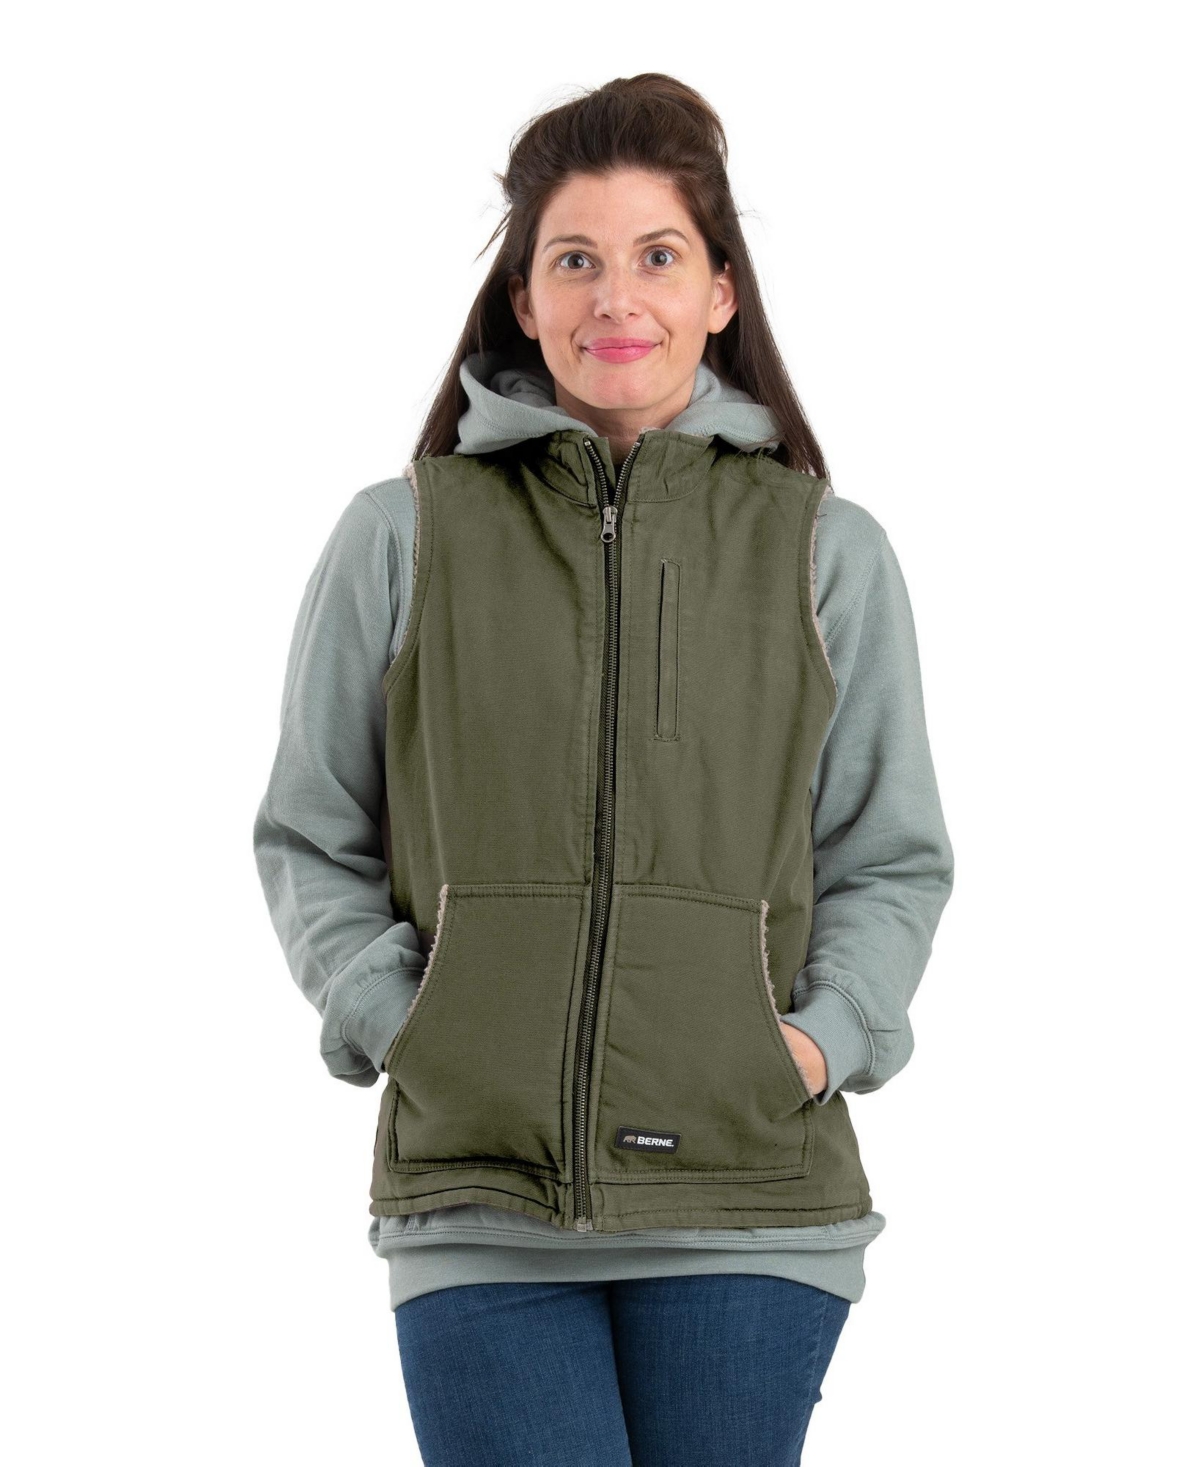 Women's Lined Softstone Duck Vest - Tuscan